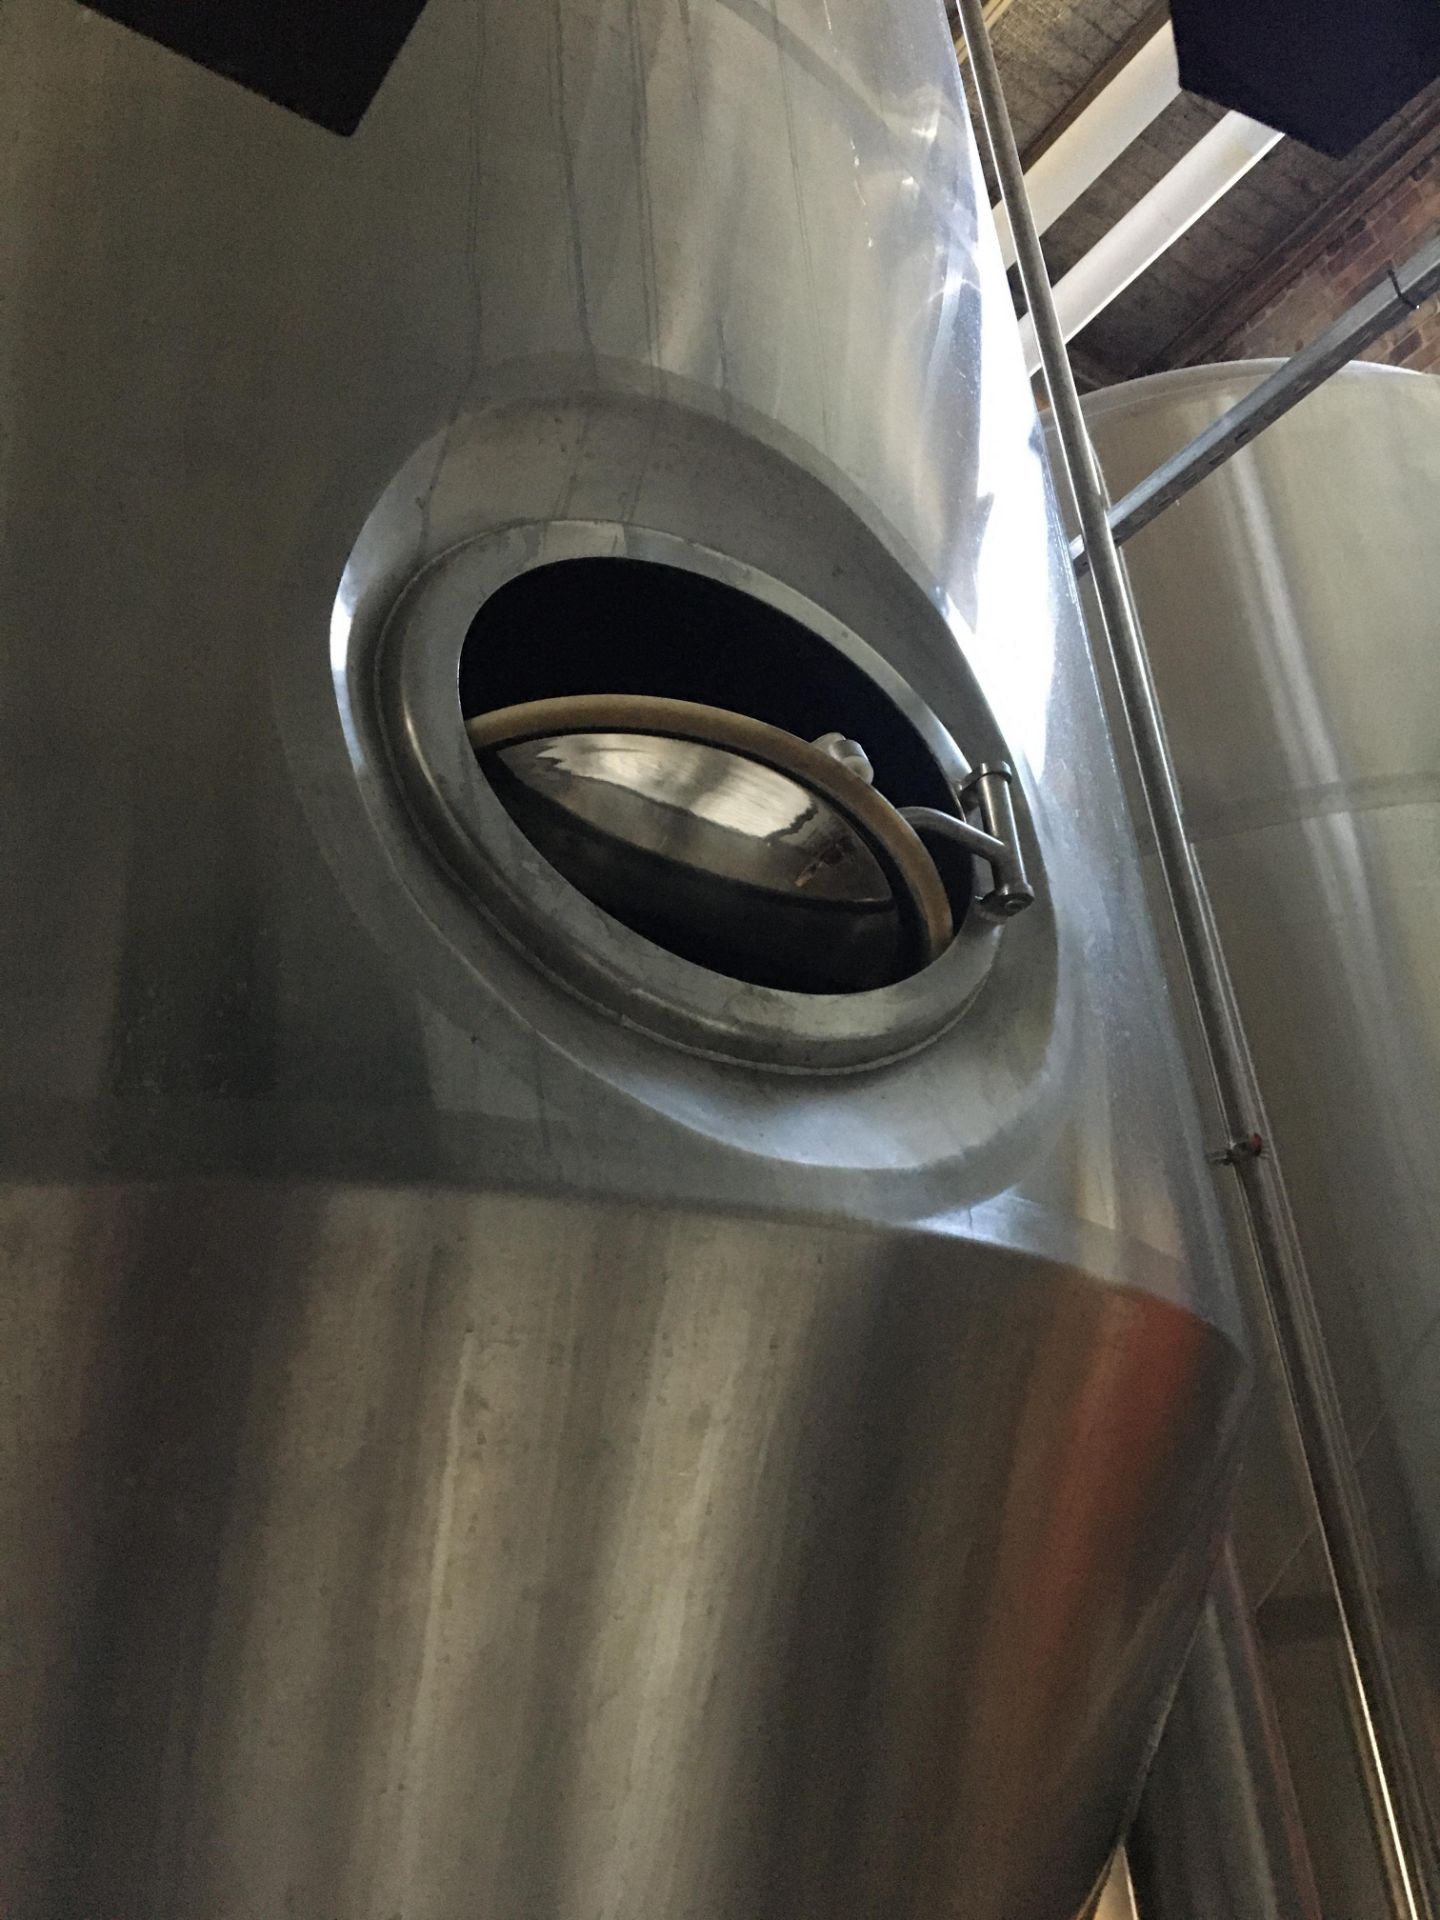 80-BBL Minnetonka Fermentation Tank, Model 80-BBL, Year 2017, Stainless Steel; Vessel store wort and - Image 10 of 14